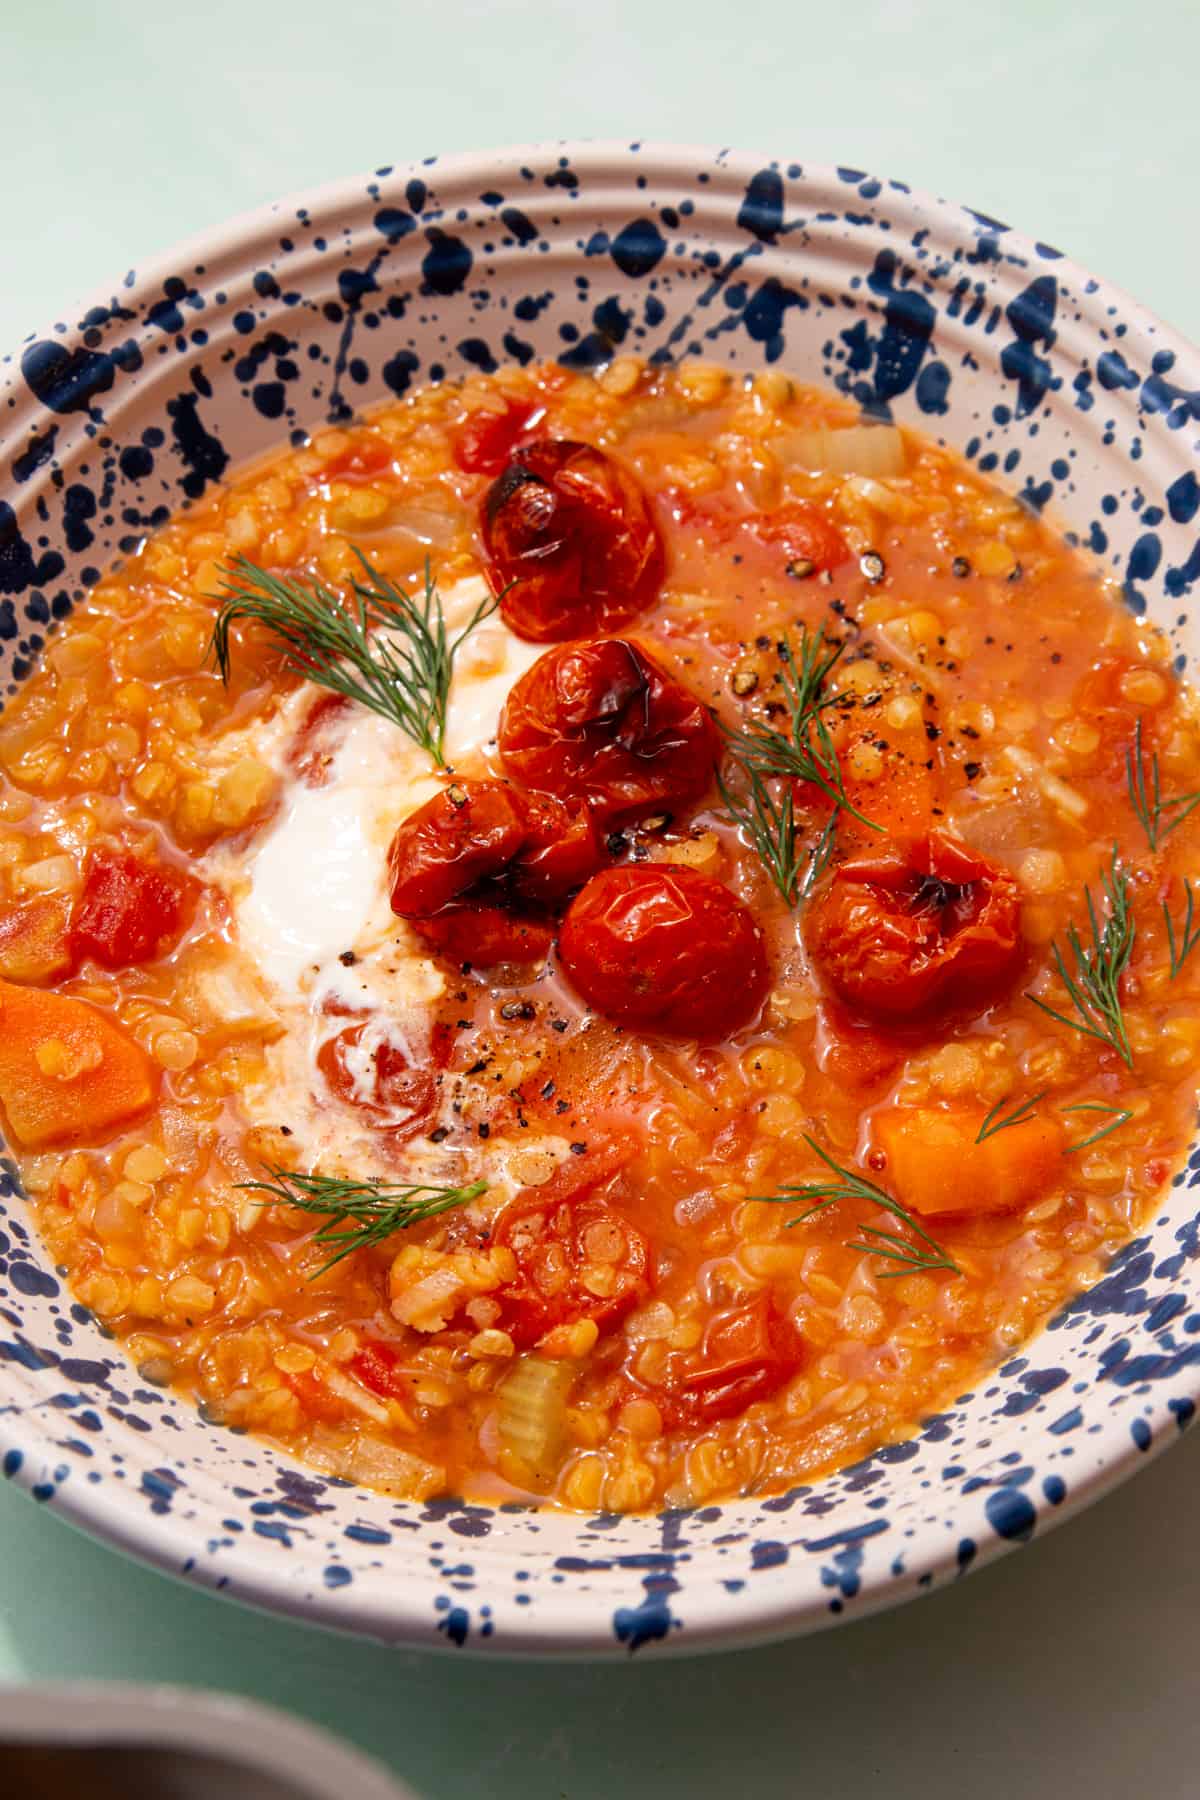 A patterned bowl full of red lentil soup with carrots, roasted cherry tomatoes, some dill and a dollop of creme fraiche.